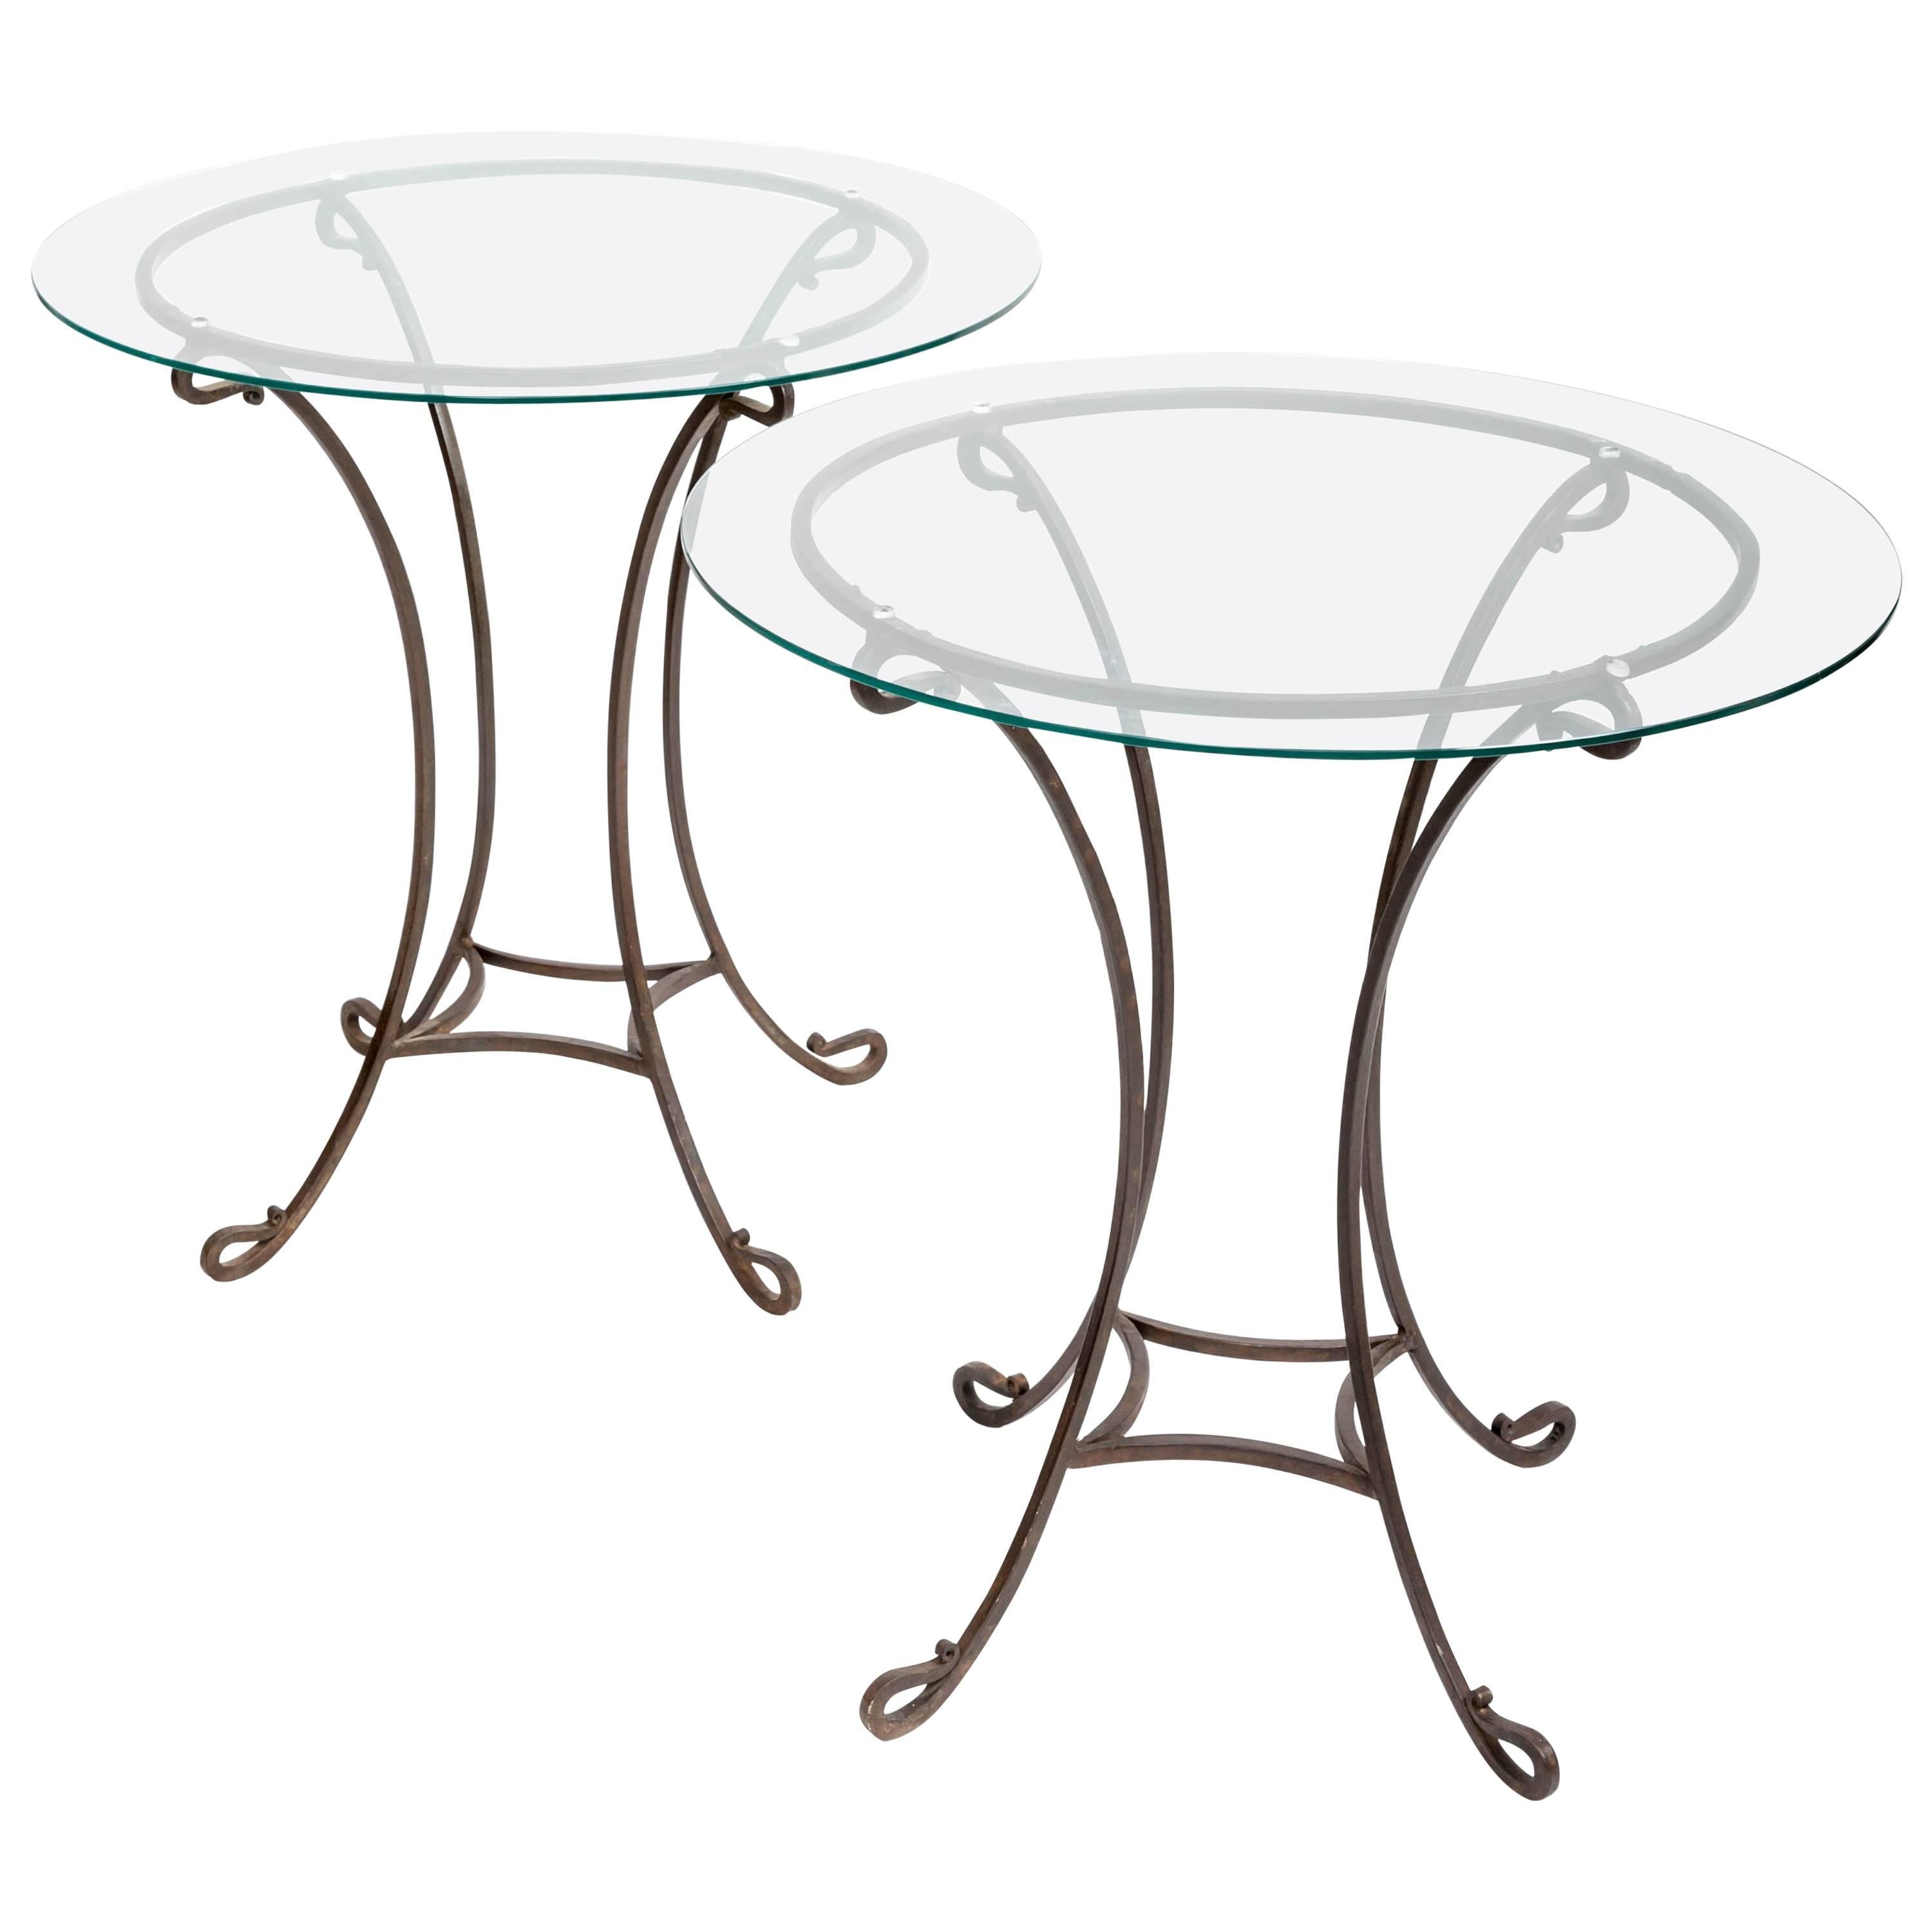 Pair of Wrought Iron Side Tables, France, circa 1940s